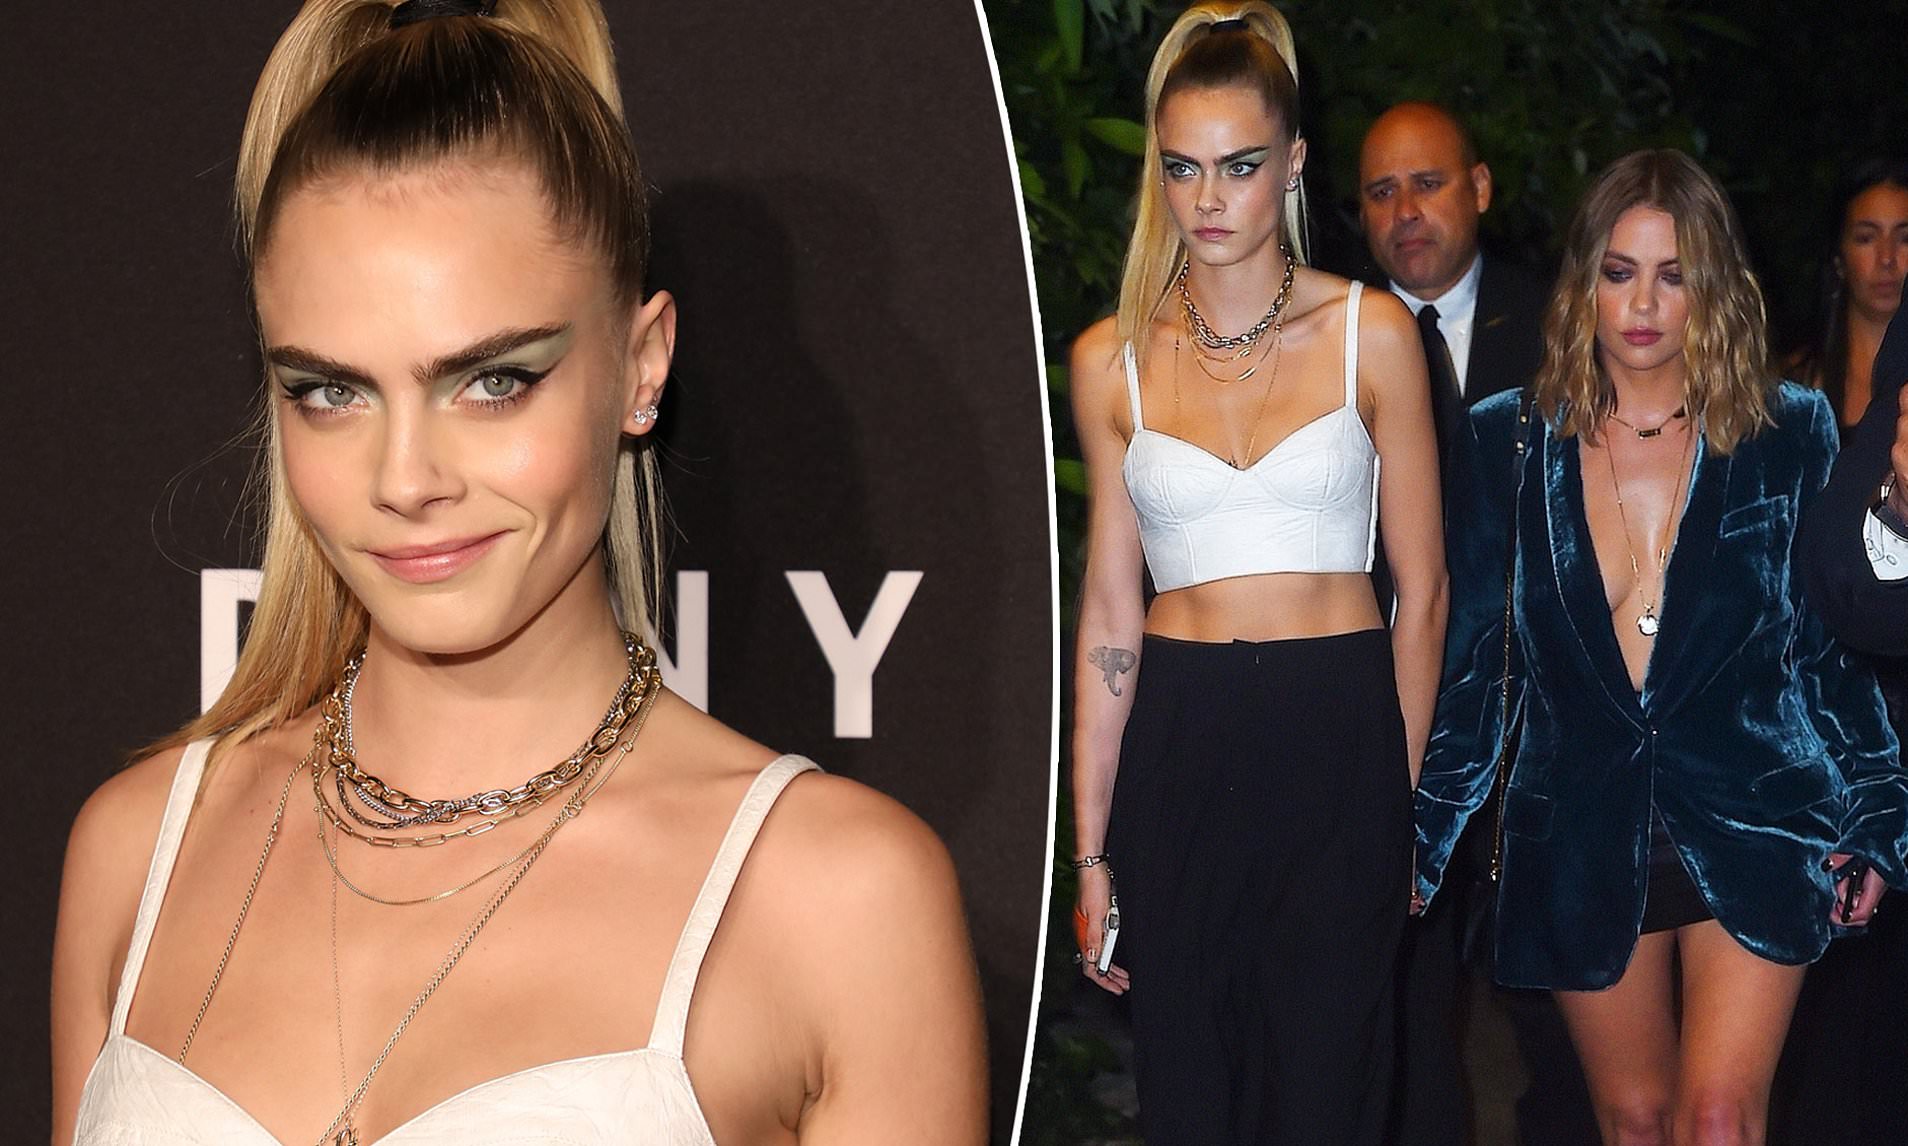 Cara Delevigne announces she and Ashley Benson ‘broke up’ after 19-month romance… but it appears as if she was hacked on Twitter